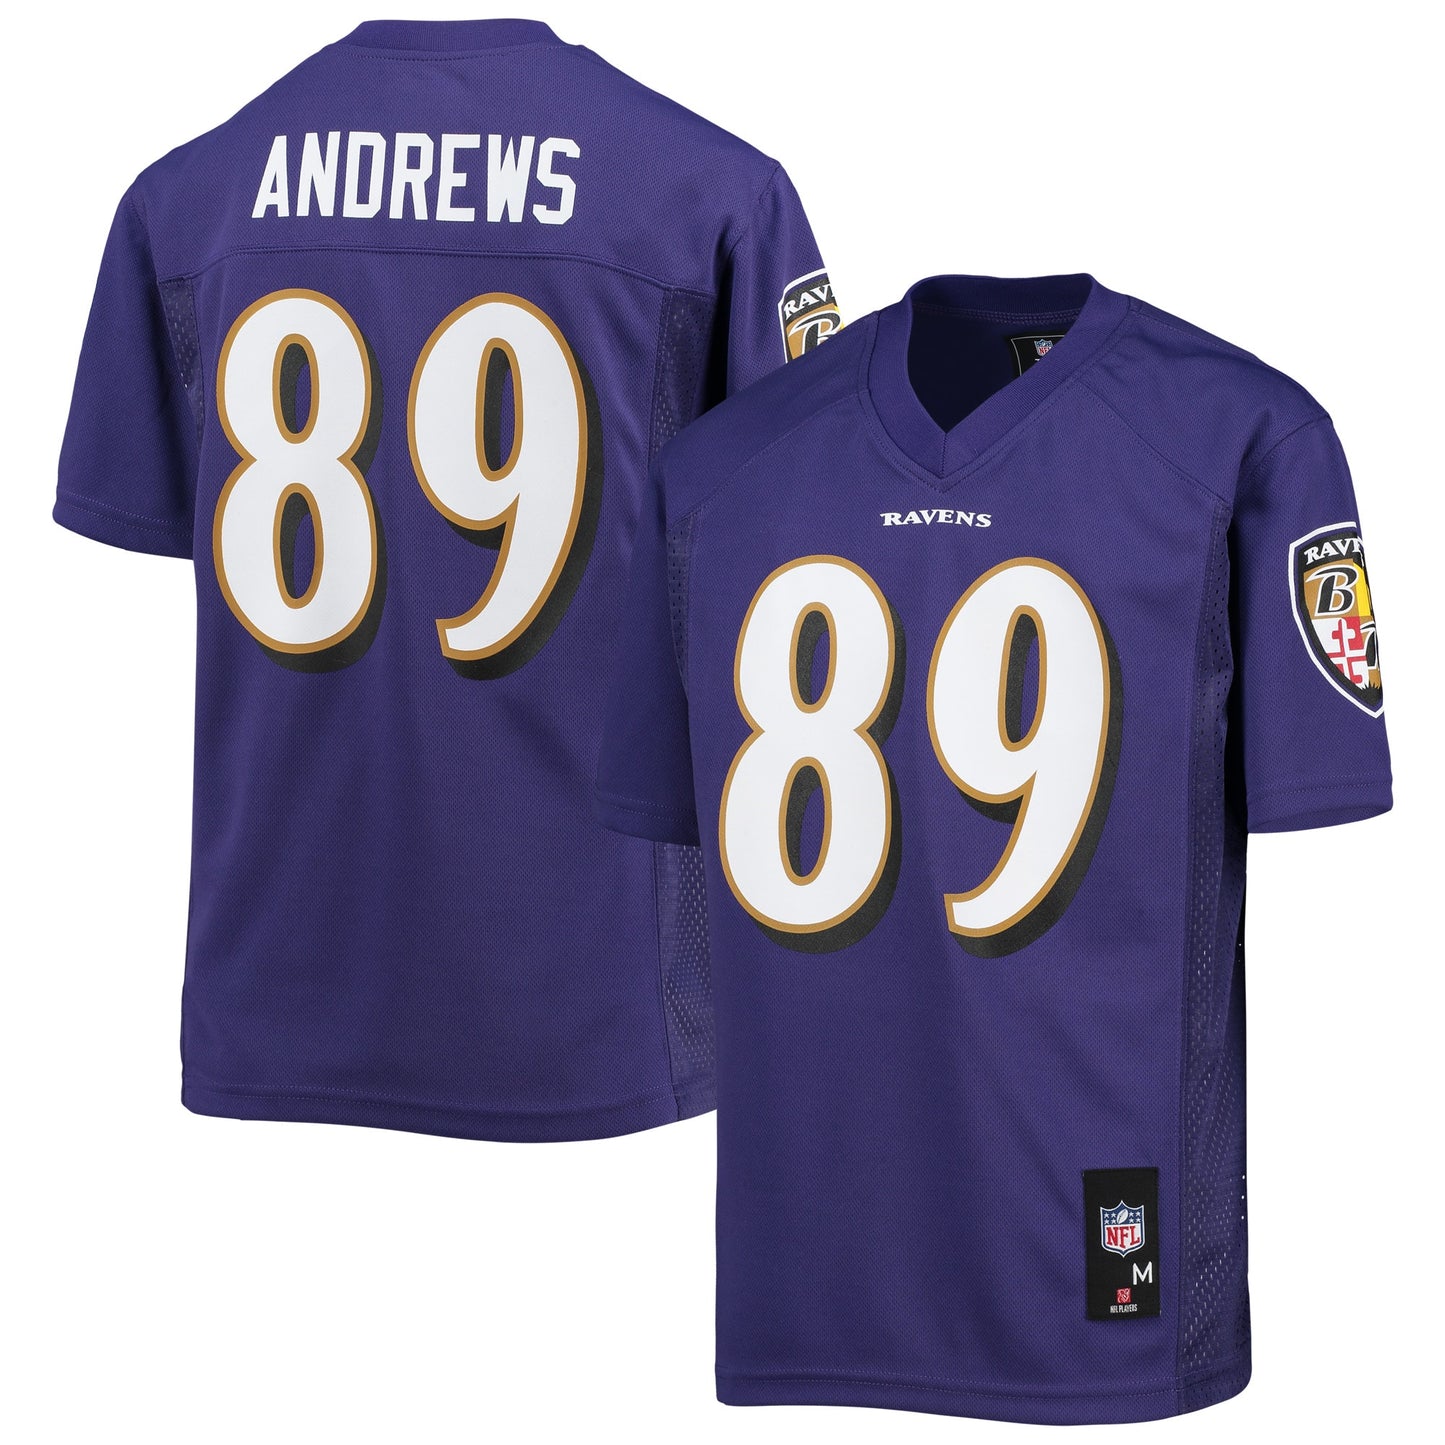 Mark Andrews Baltimore Ravens Youth Replica Player Jersey - Purple